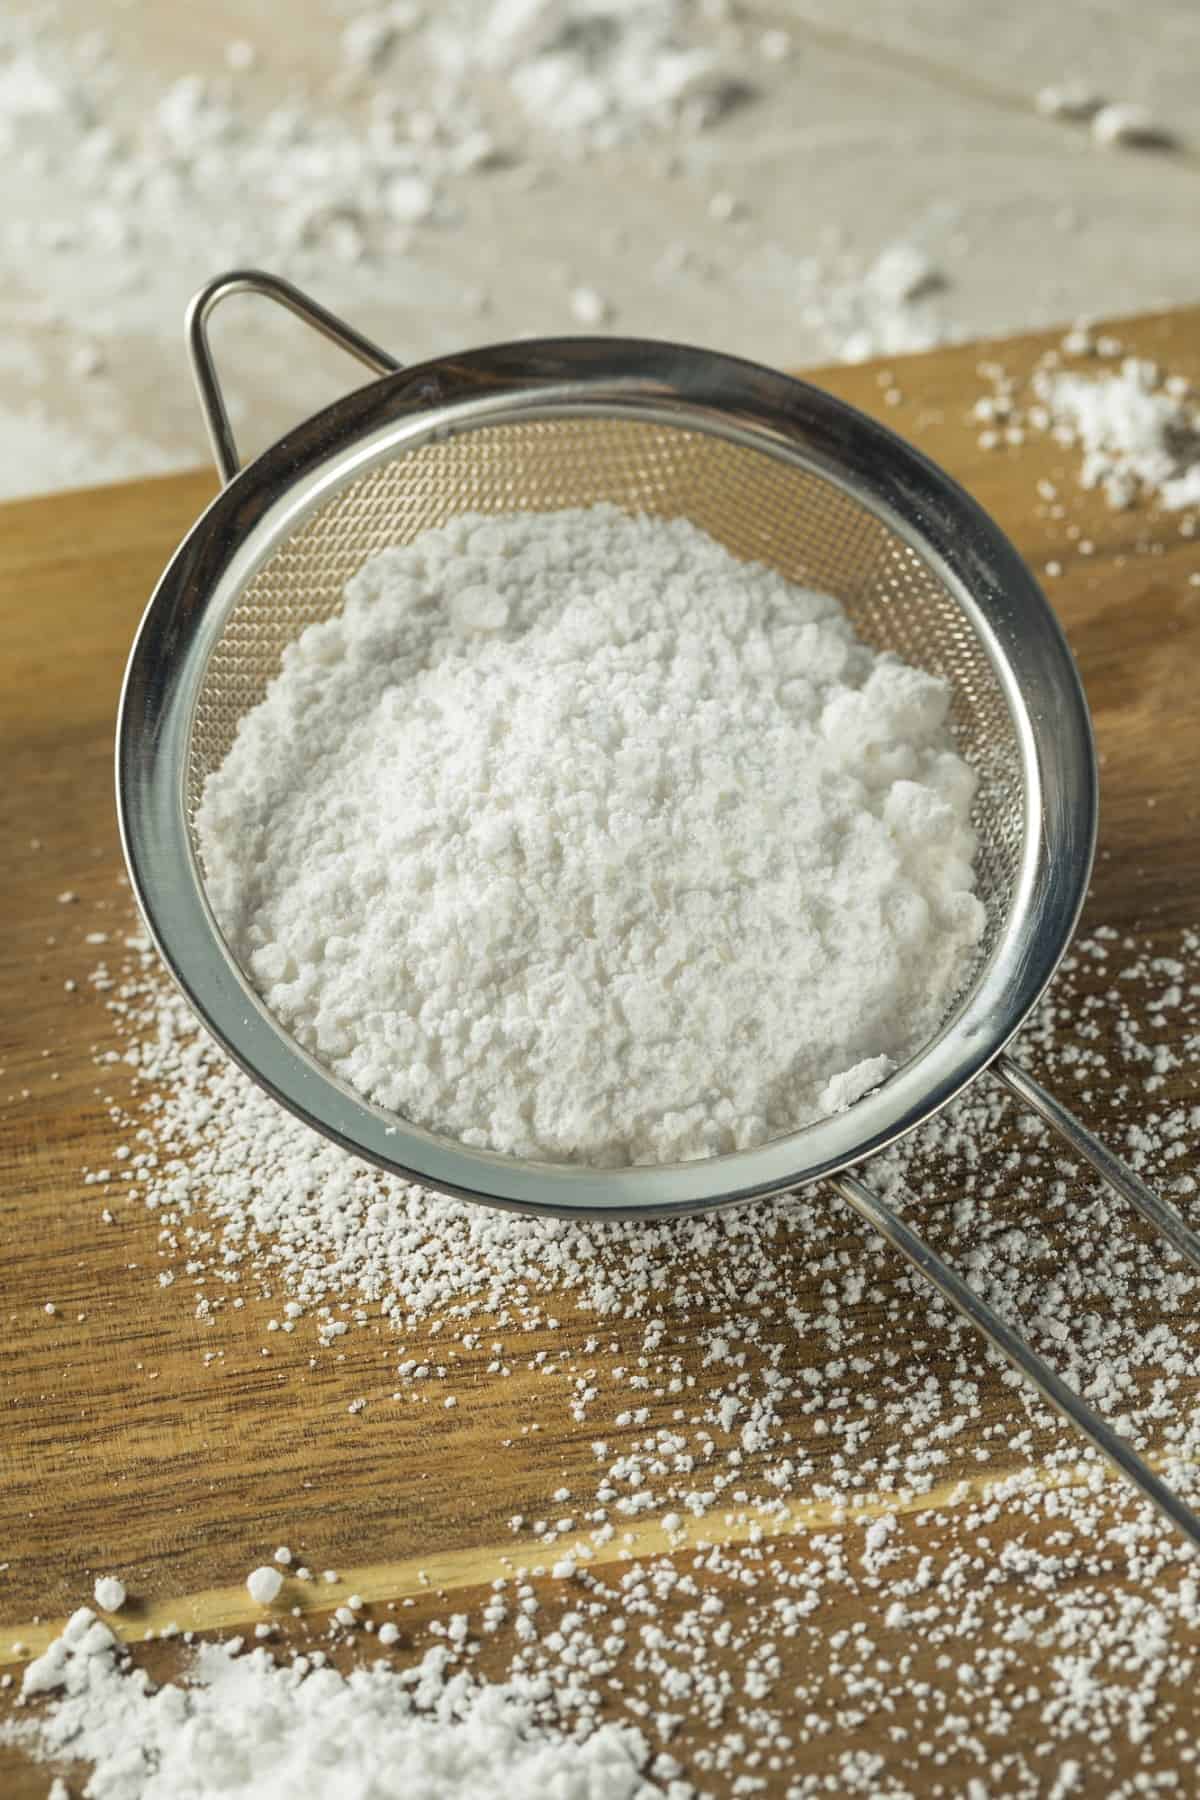 Confectioners sugar in a sifter.